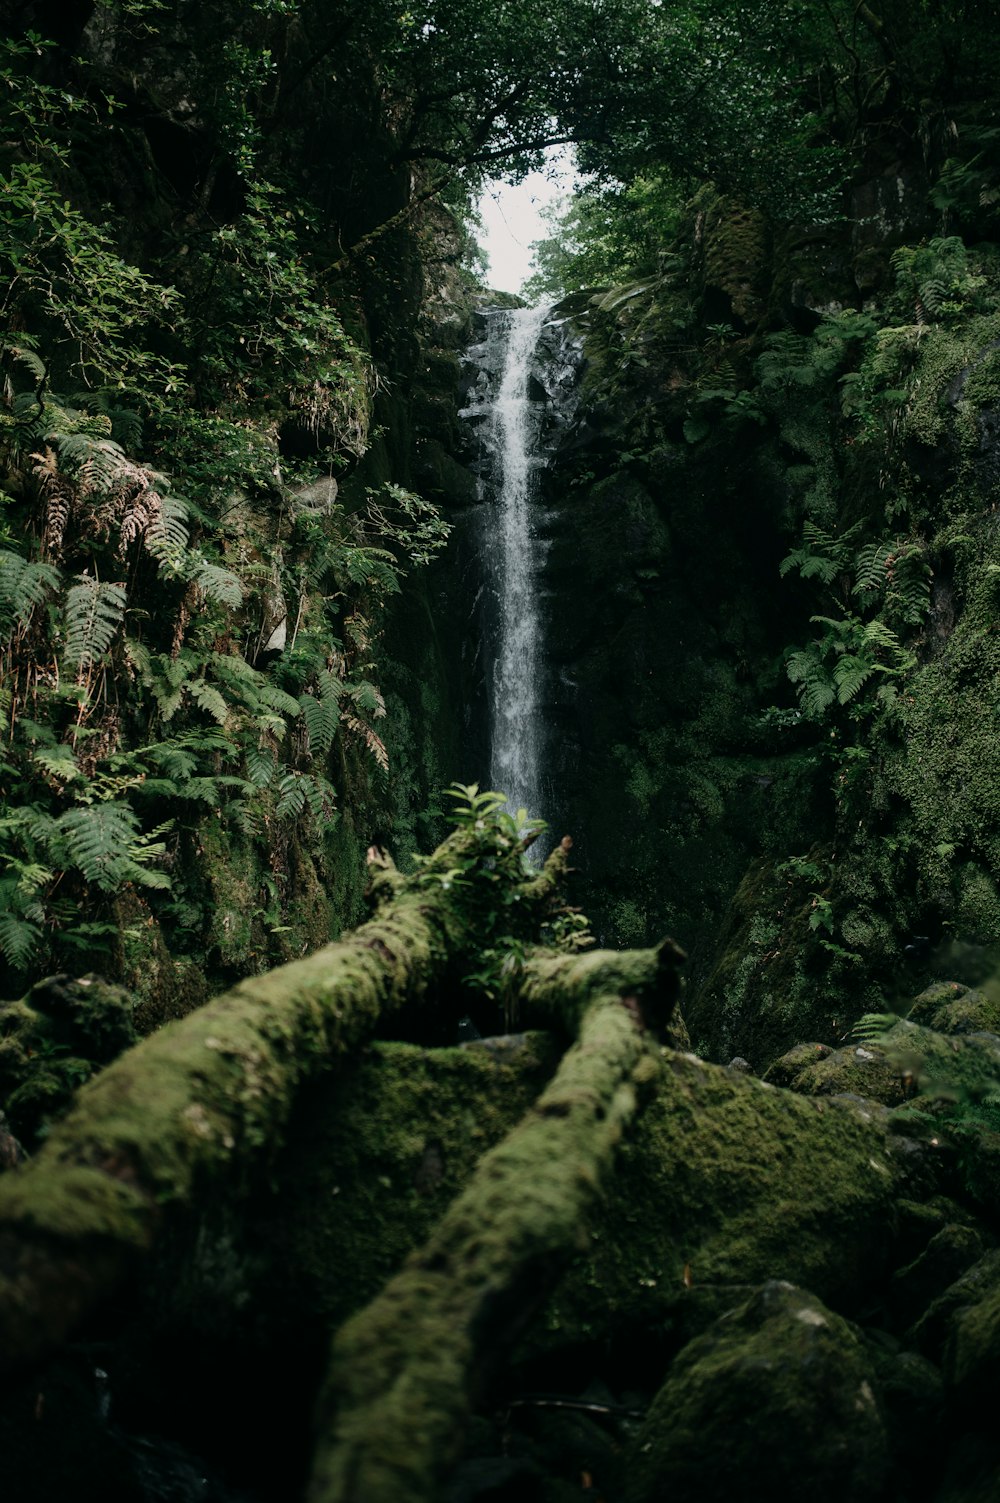 a very tall waterfall in the middle of a forest